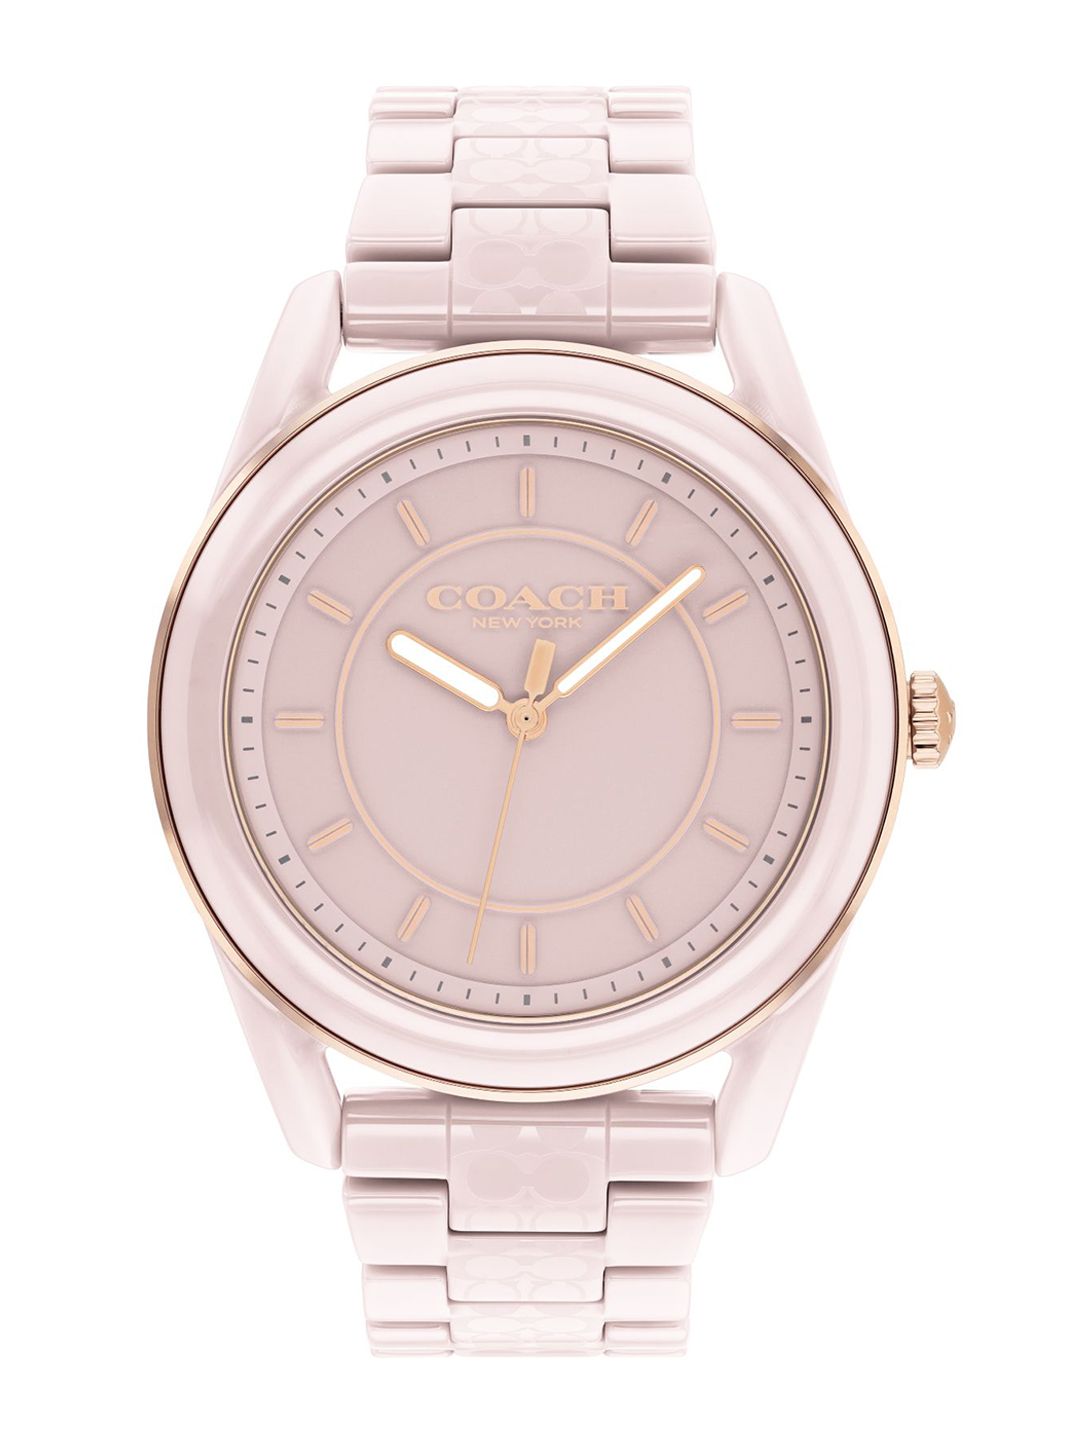 Coach Women Beige Embellished Dial & Beige Ceramic Bracelet Style Straps Analogue Watch NCCO14503772W Price in India